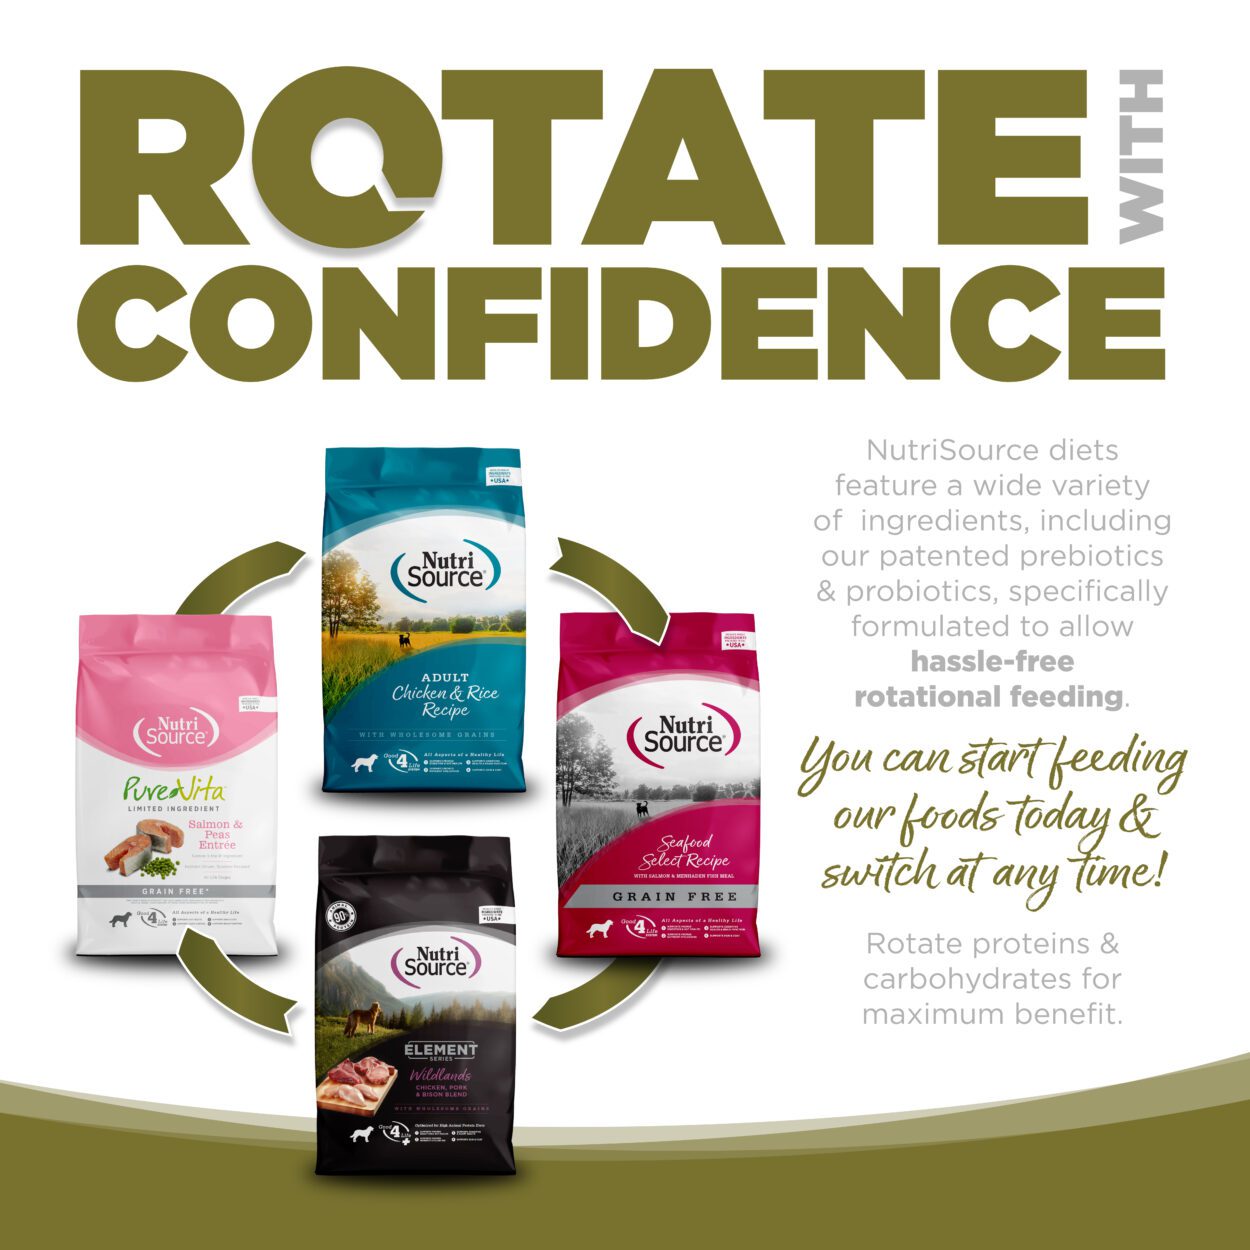 Rotate between diets with confidence